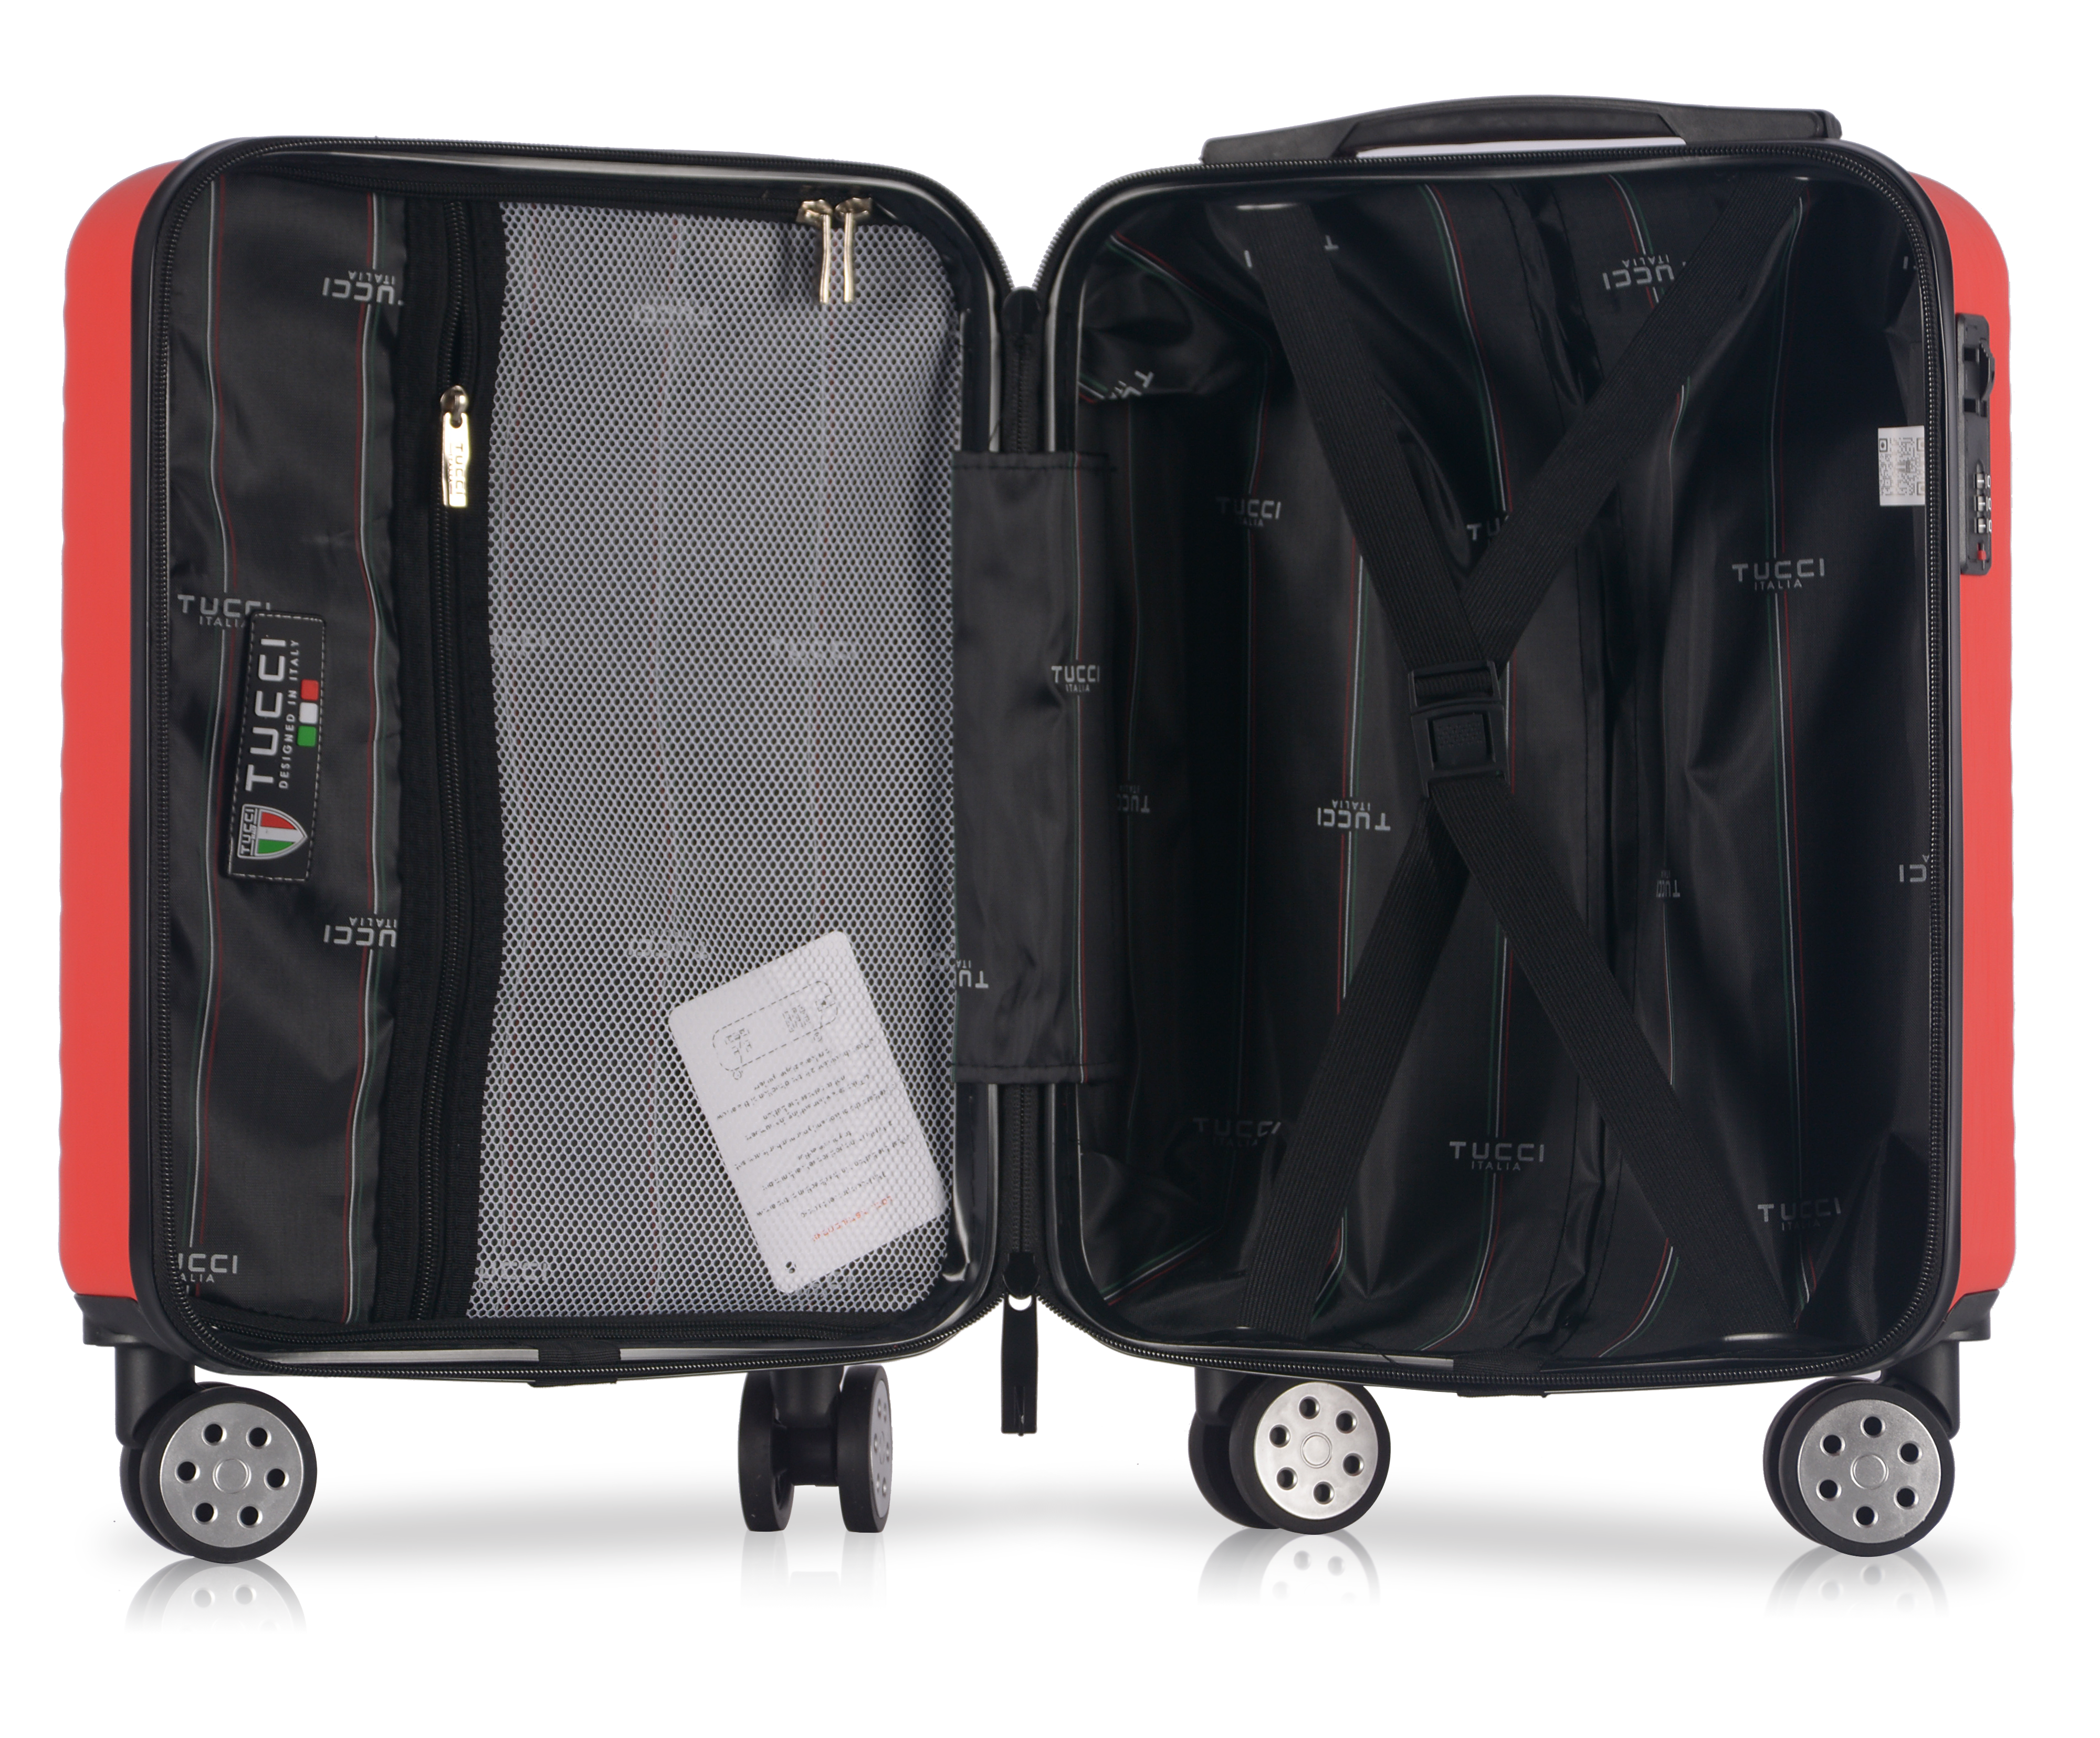 TUCCI Italy STORTA ABS 17" Carry On Luggage Suitcase